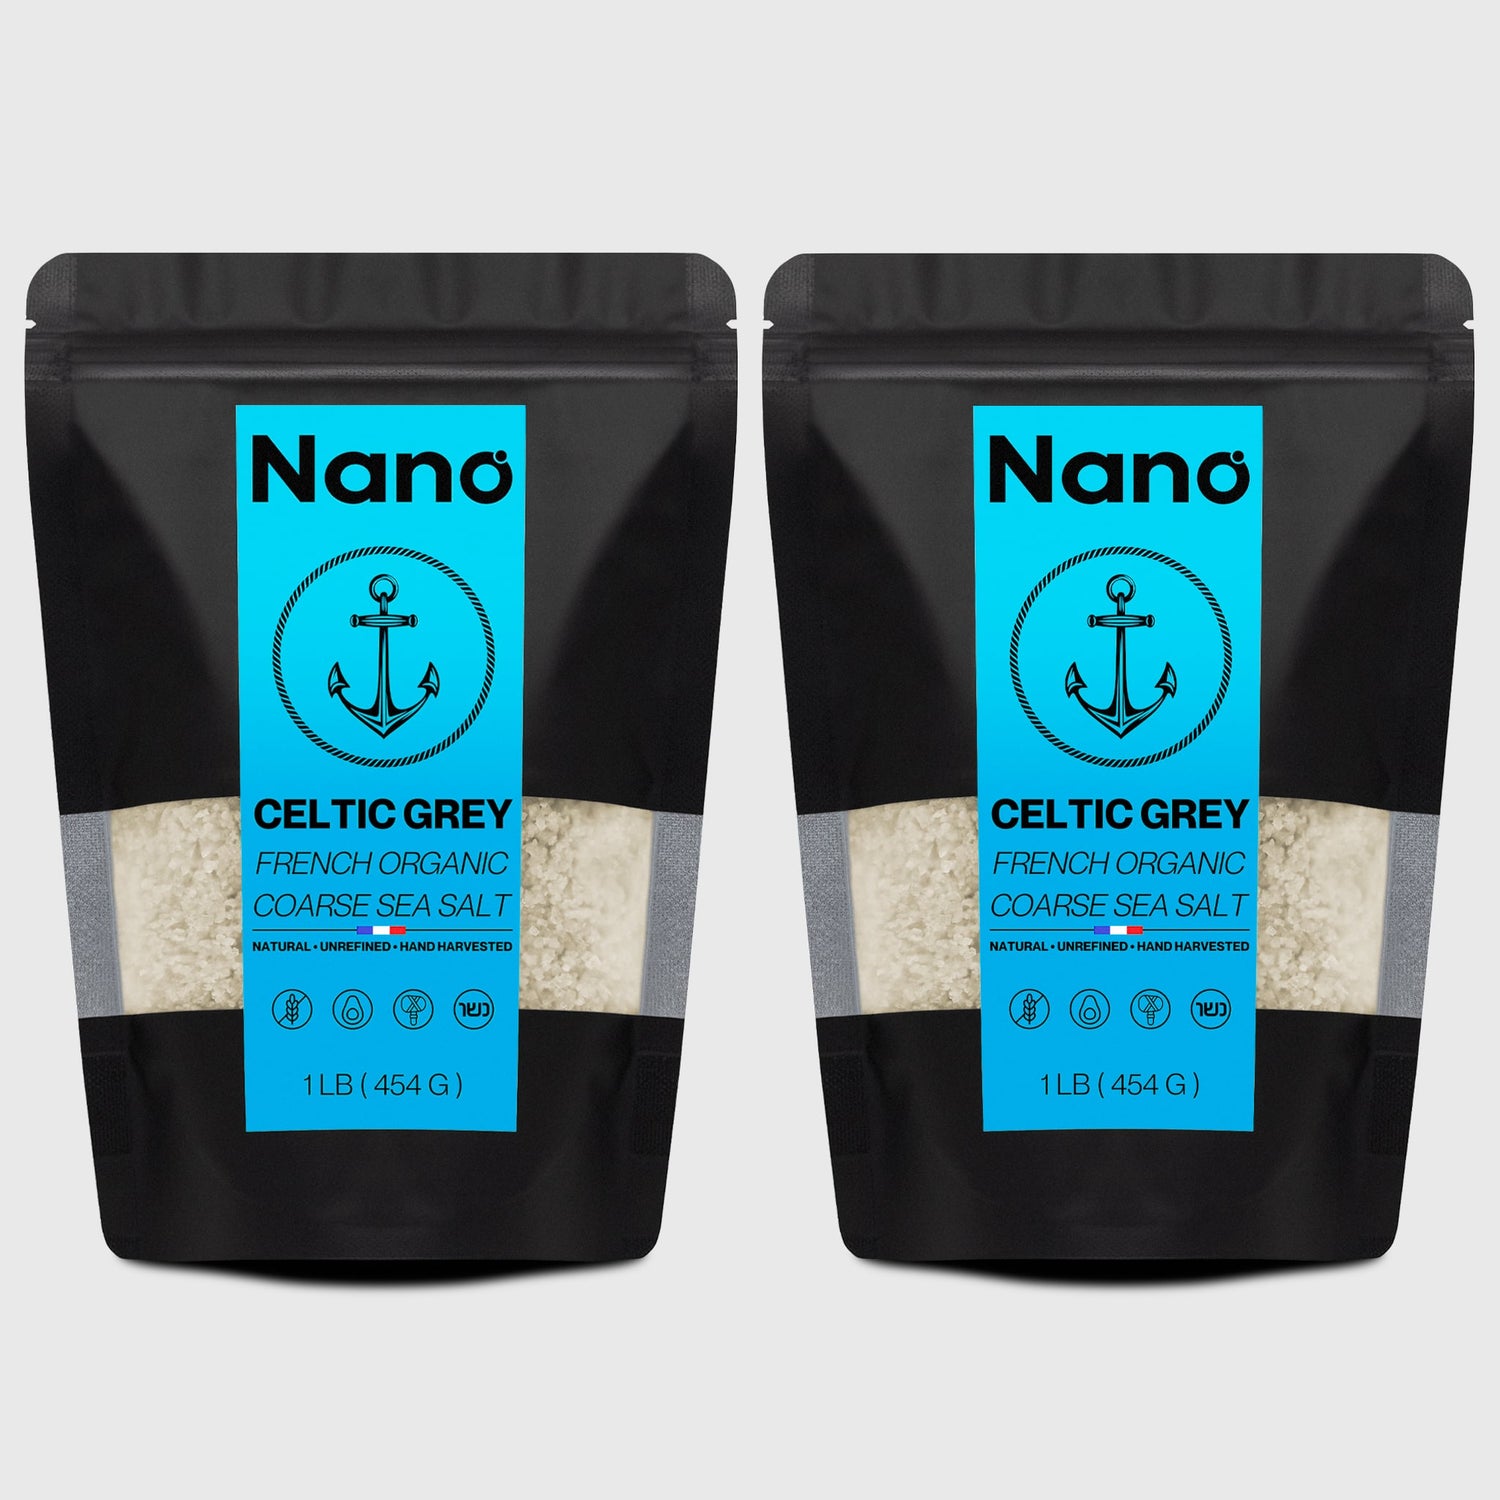 Two 1 LB bags of Nano Celtic Grey French Organic Coarse Sea Salt. Natural, unrefined, and hand harvested 